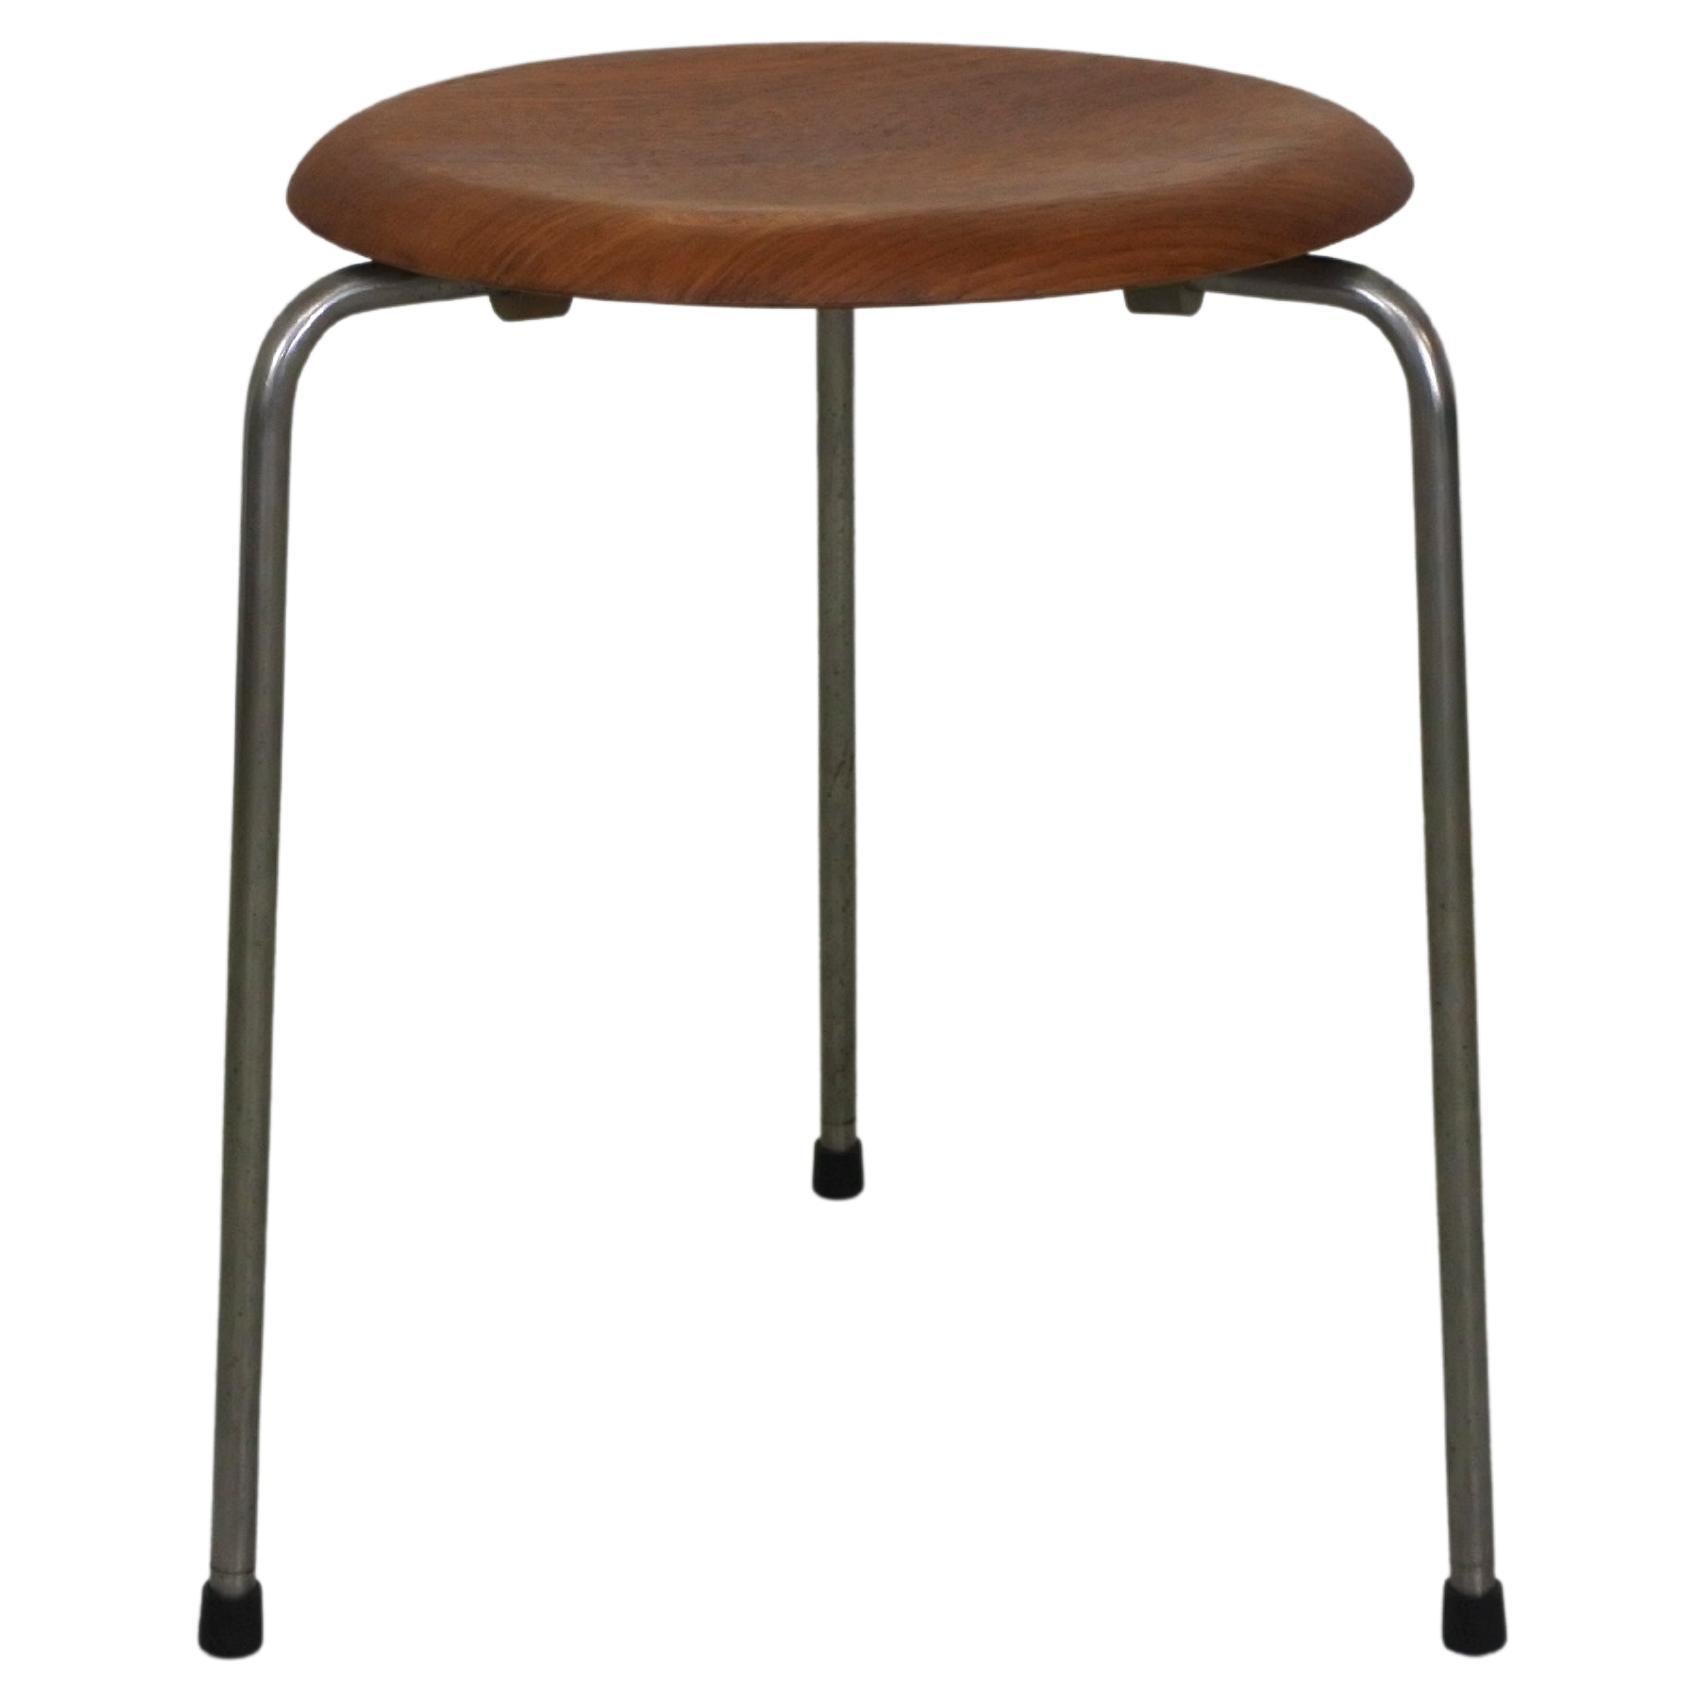 Early Tripod Dot Stool by Fritz Hansen, Teak and Plated Copper, Denmark 1960s For Sale